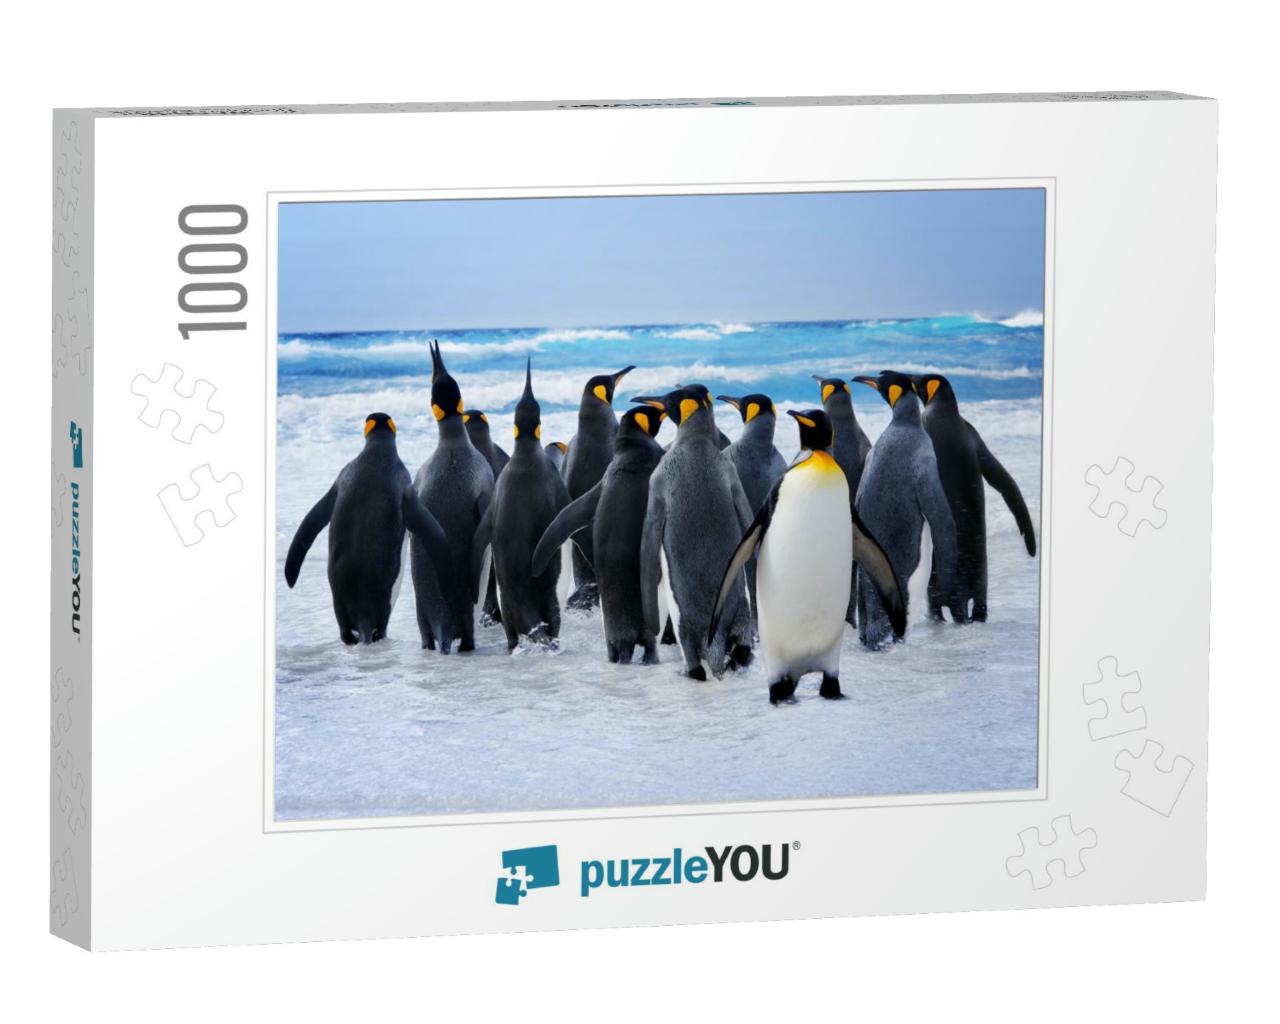 King Penguins Heading to the Water in the Falkland Island... Jigsaw Puzzle with 1000 pieces